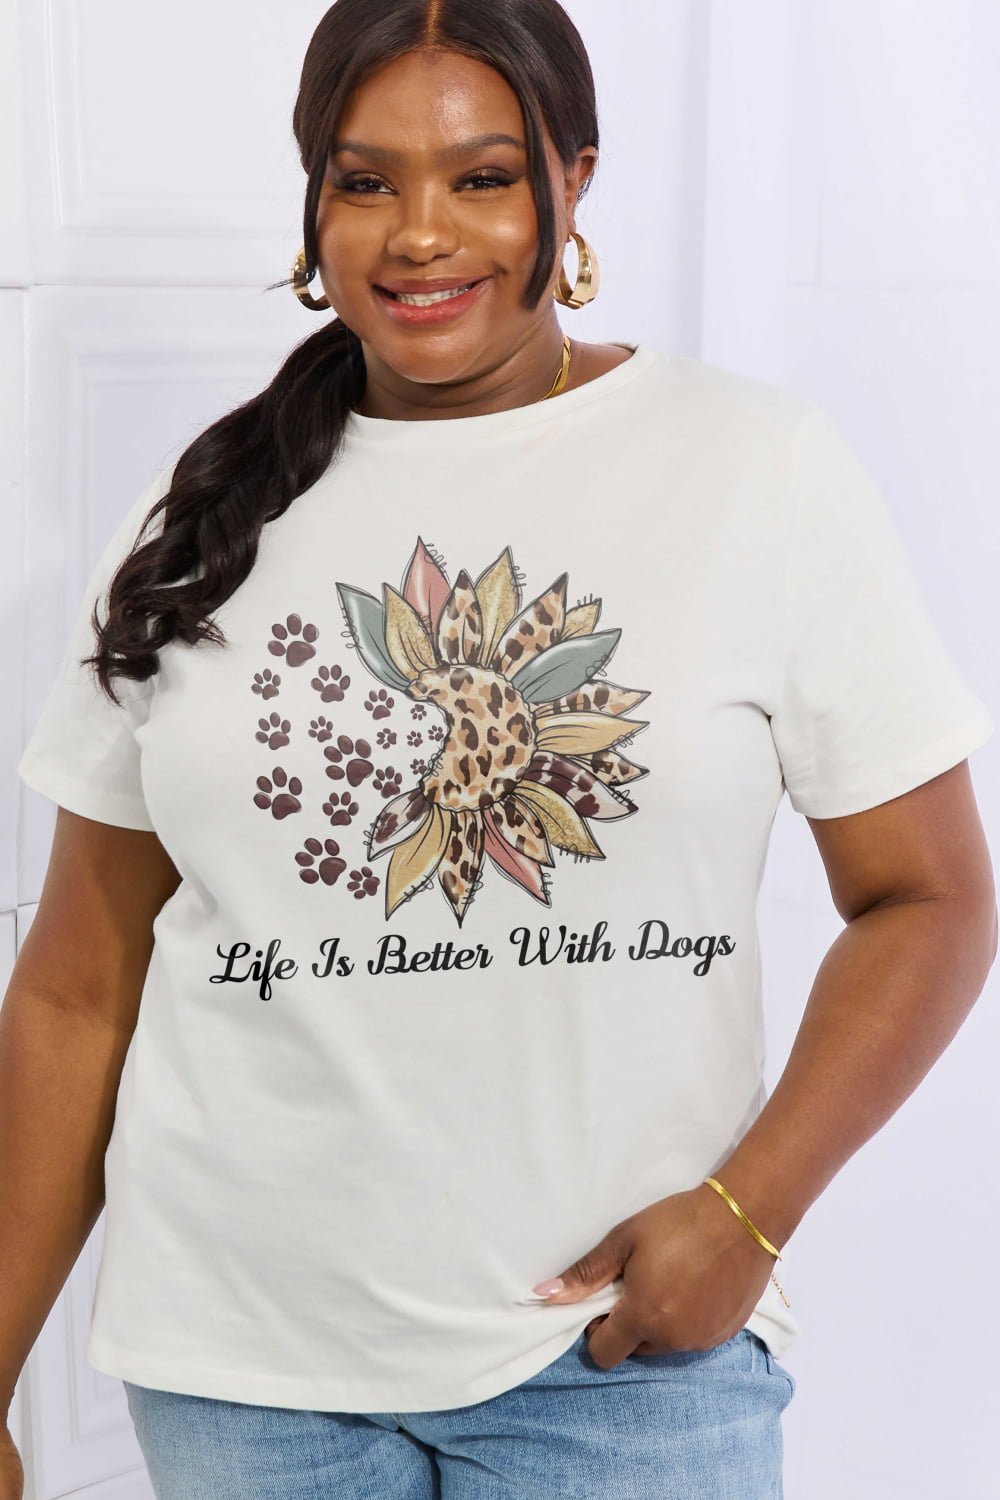 LIFE IS BETTER WITH DOGS Cotton Tee - Tangerine Goddess